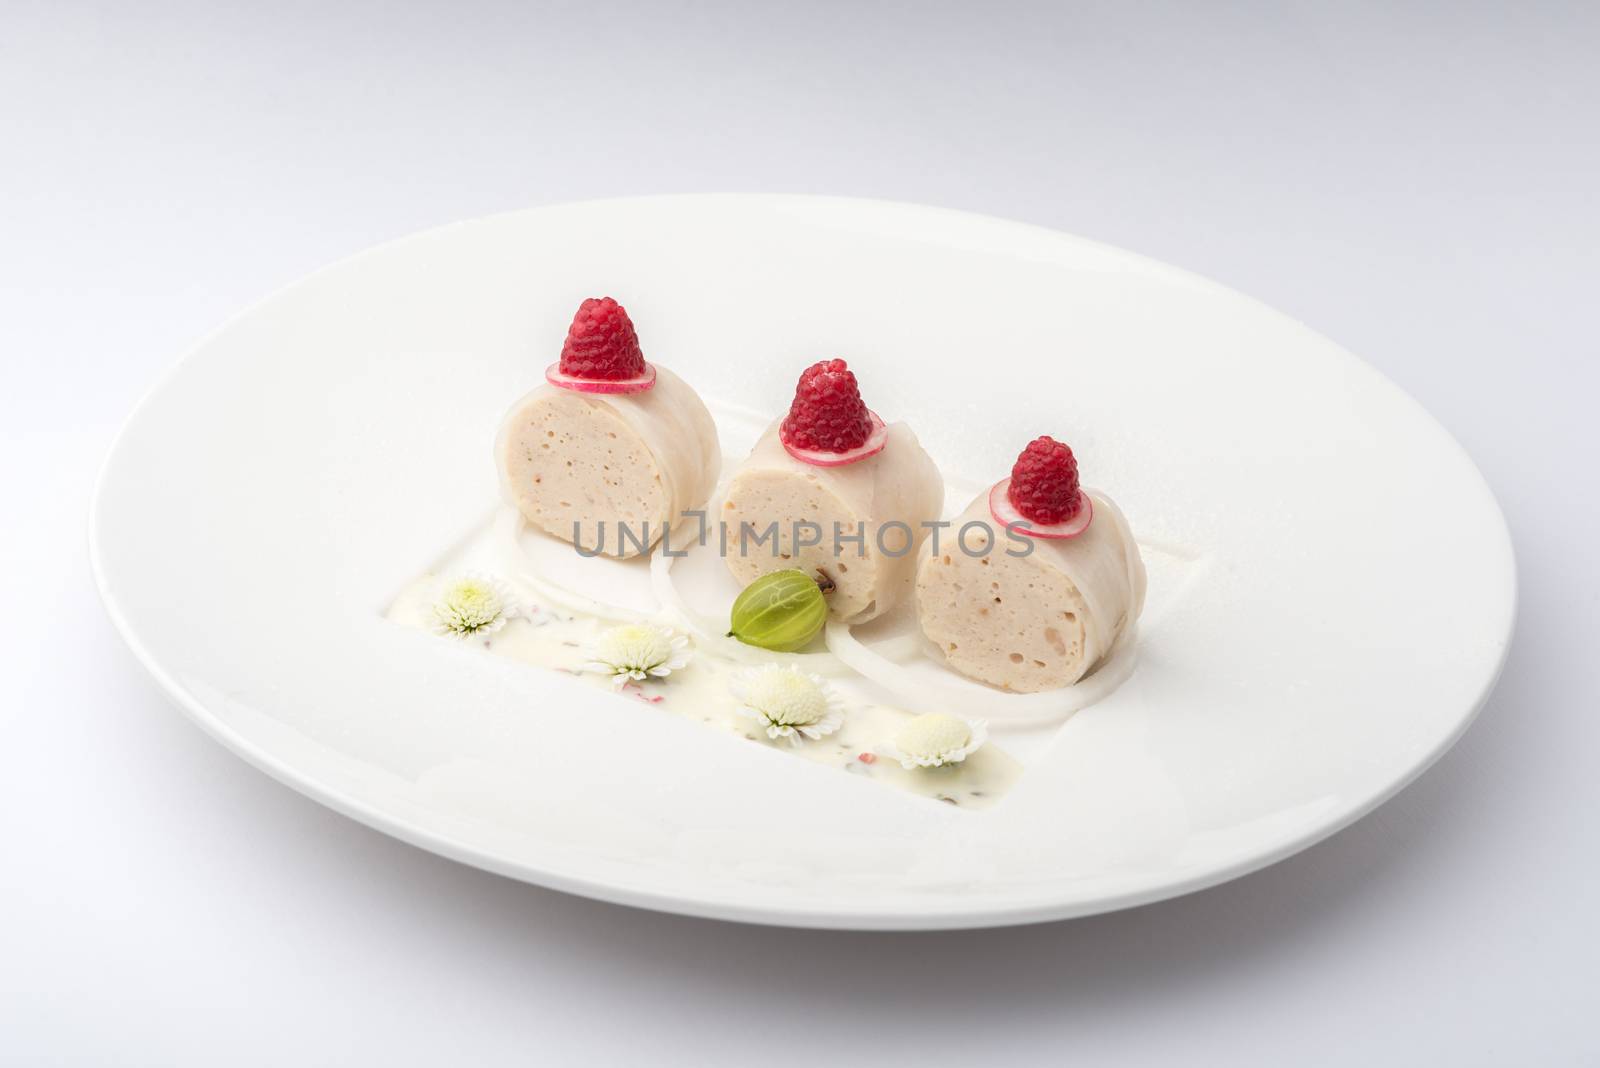 banana rolls with raspberries on a white plate on a white background